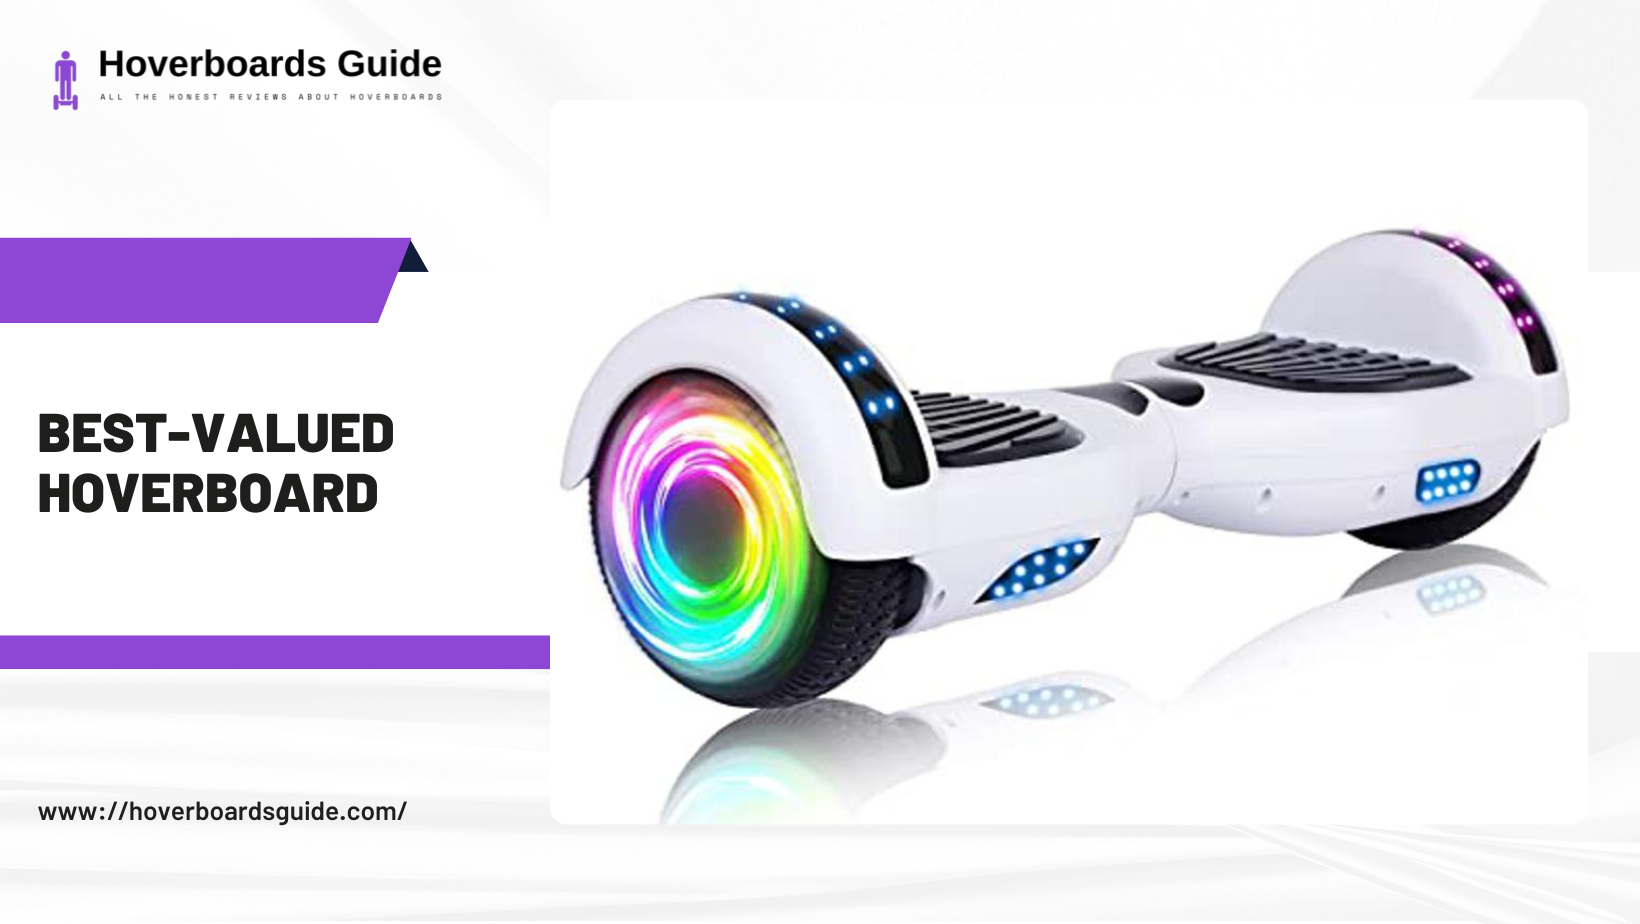 Which is the very best Hoverboard of all times